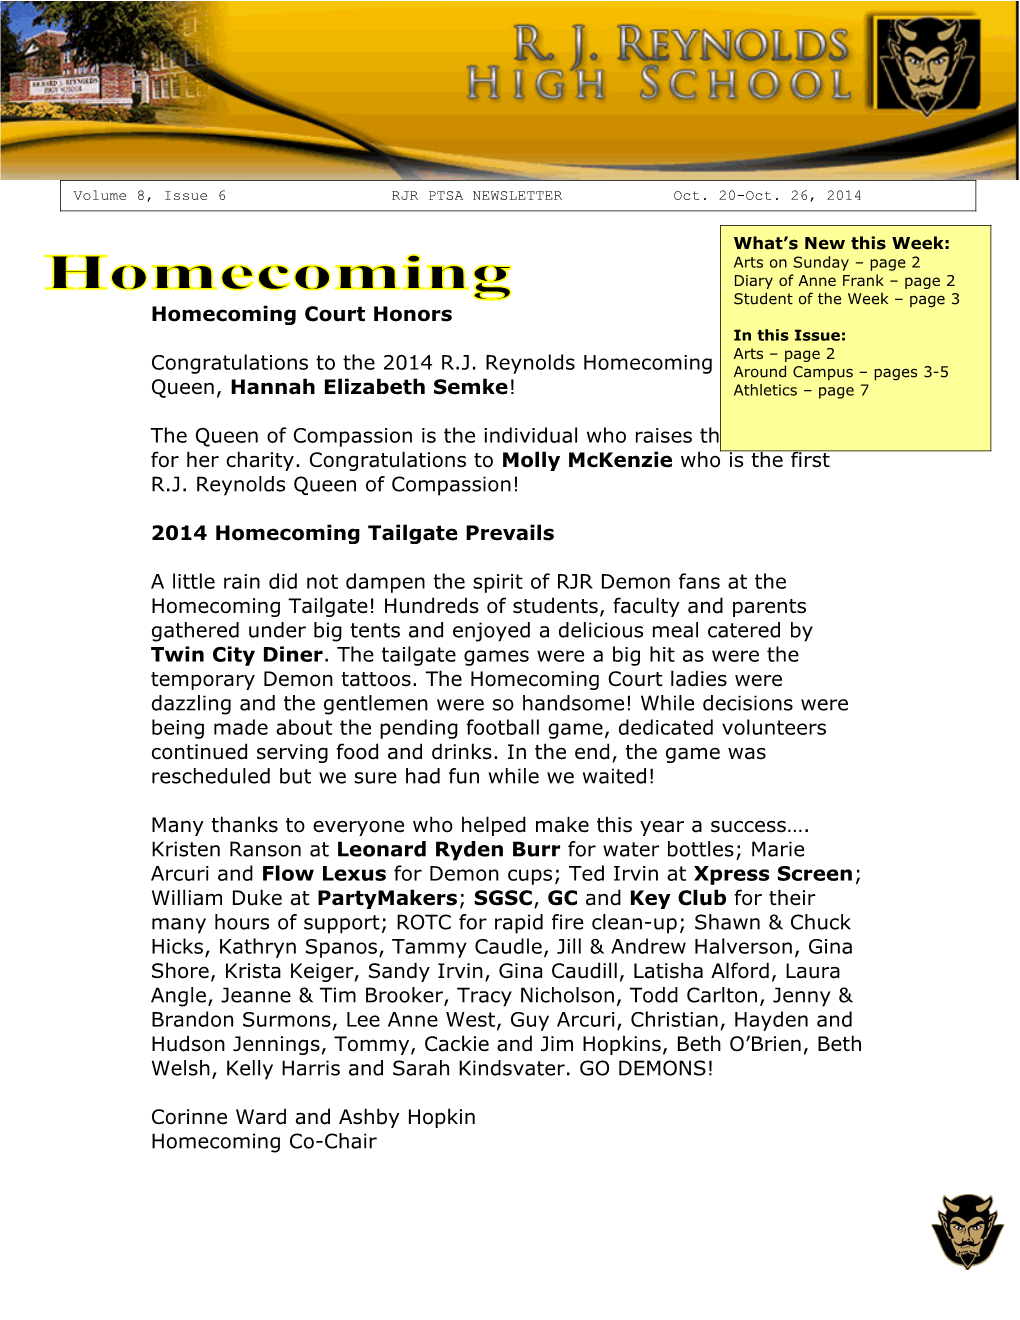 Homecoming Court Honors